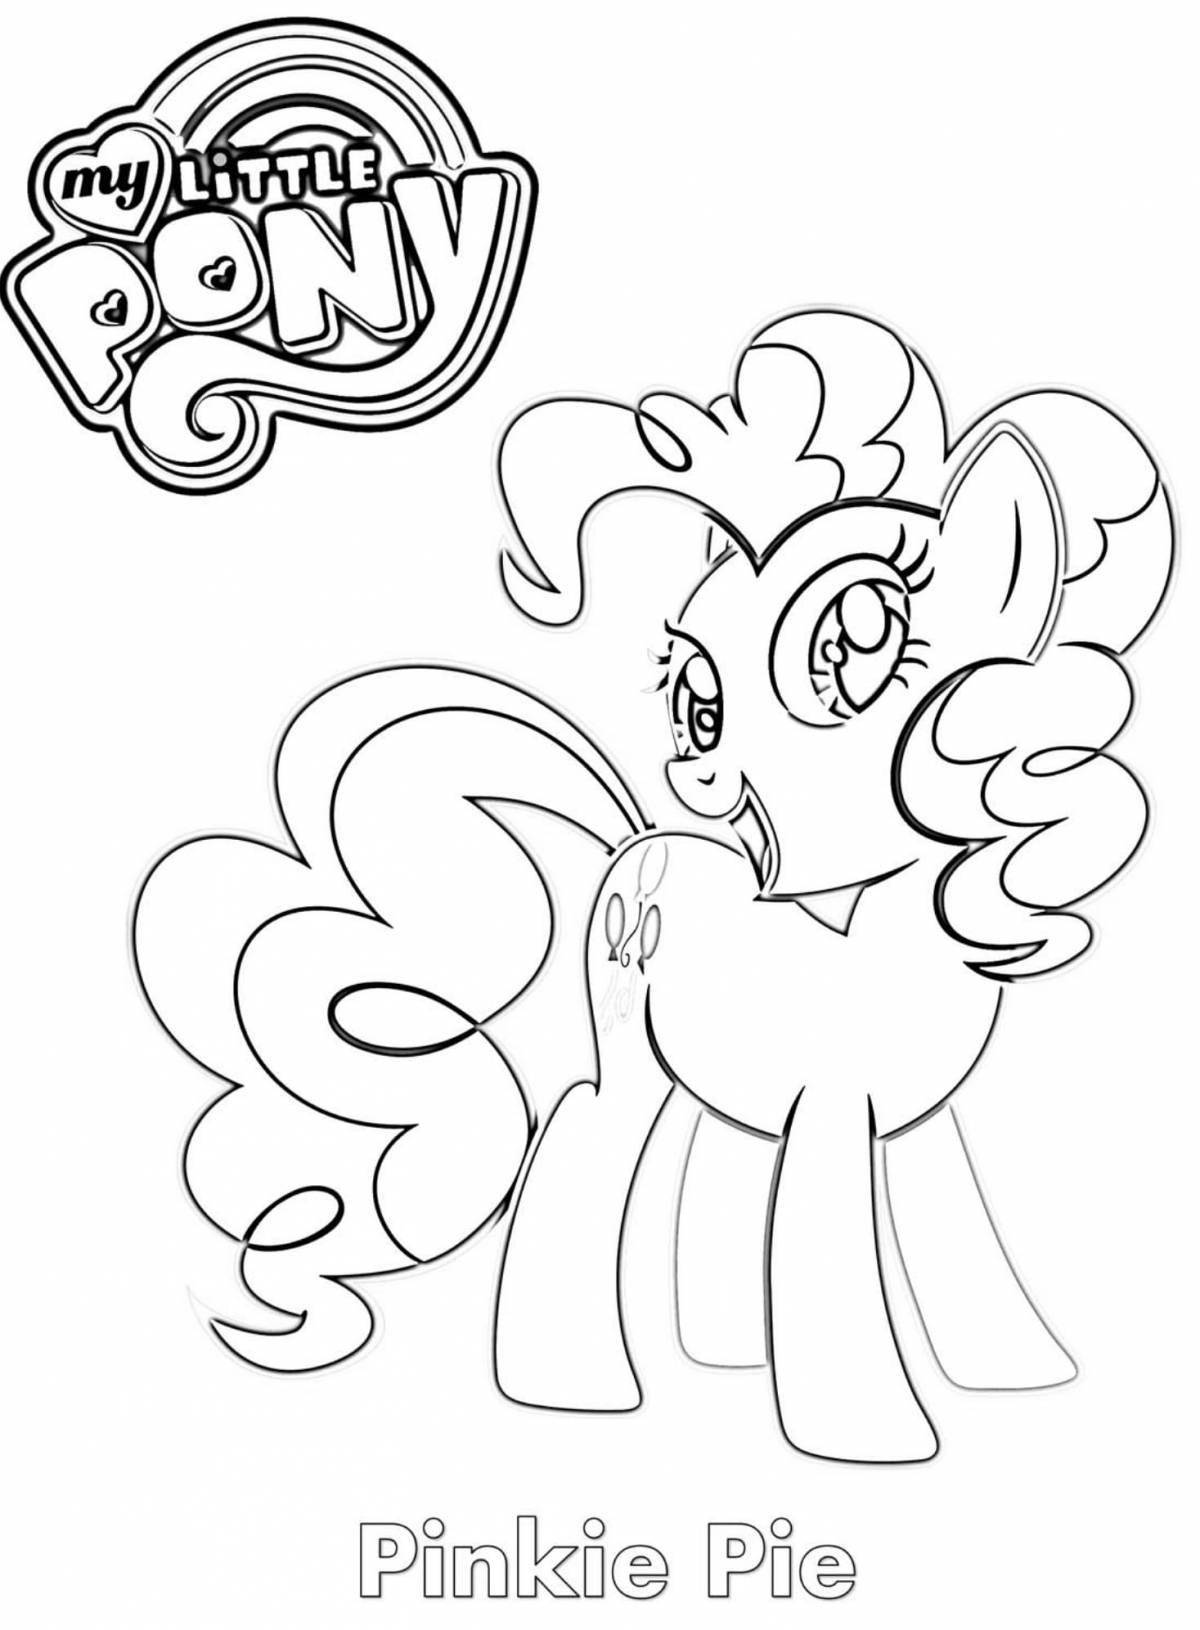 Pinkie Pie holiday coloring book